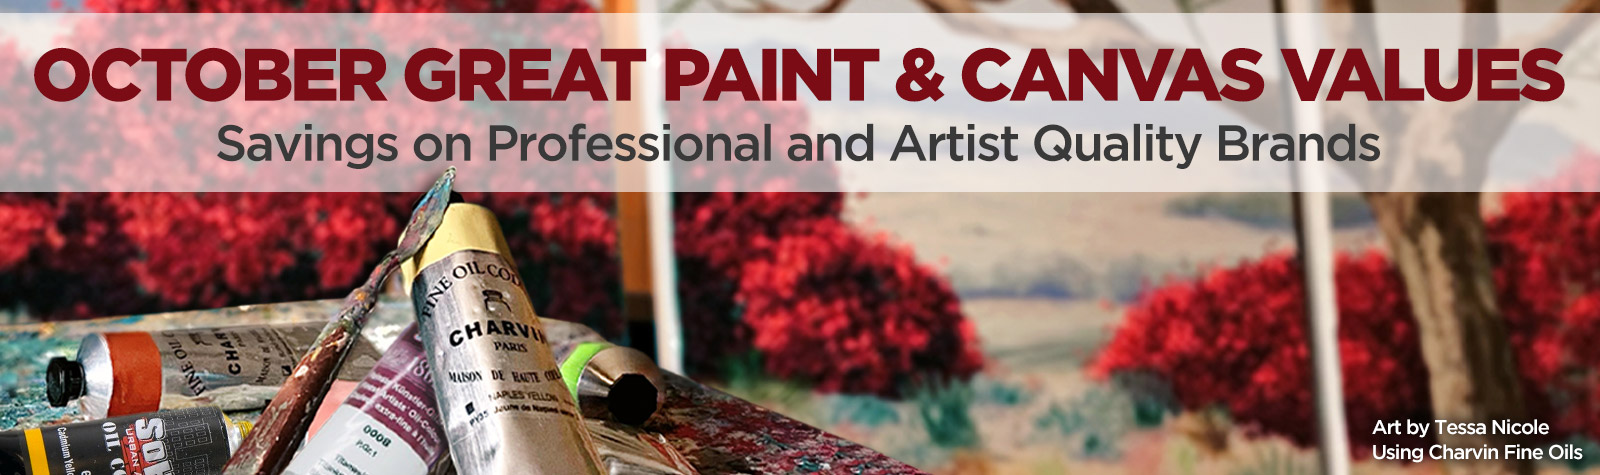 October Great Paint & Canvas Values